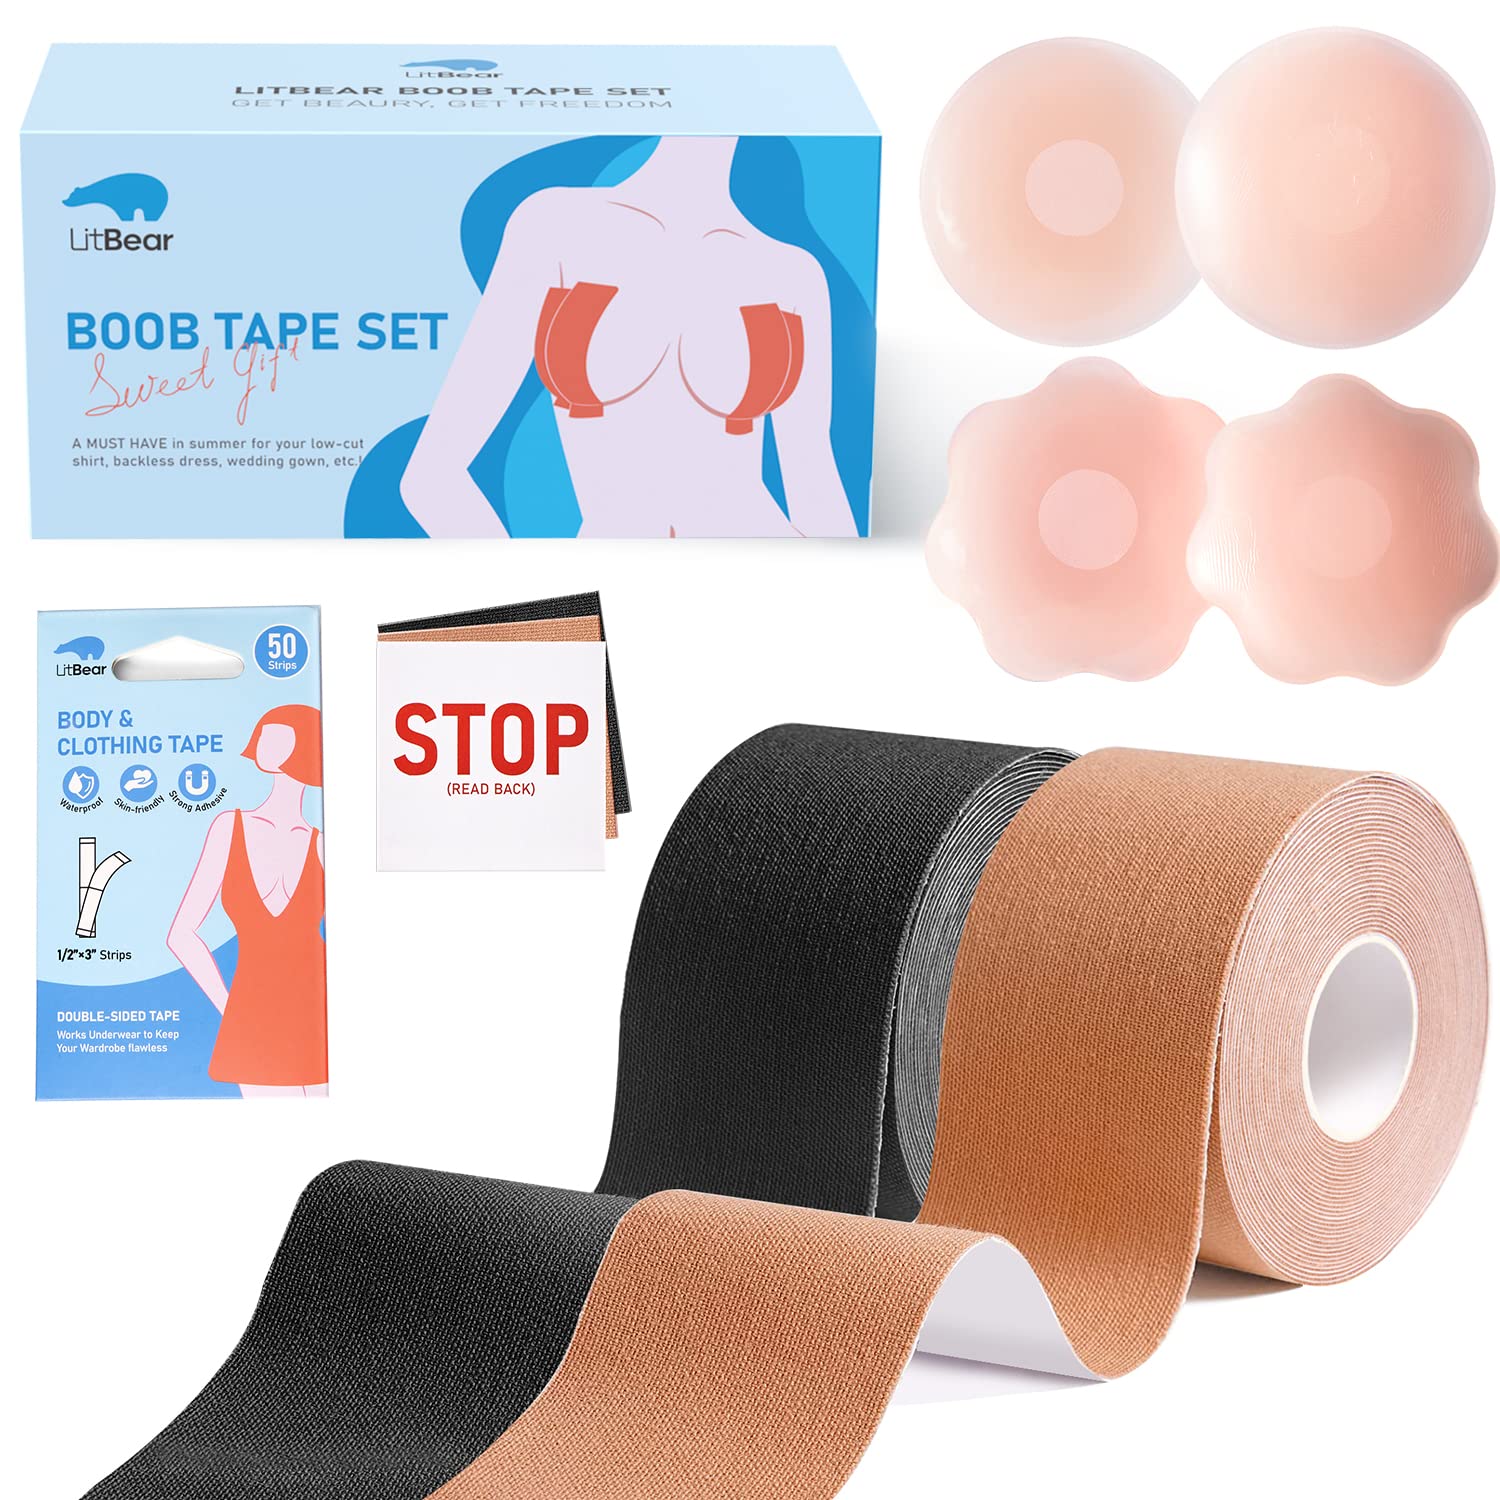 Onewly Boob Tape, Boobtape for Breast Lift, 4 Pcs Soft Silicone Nipple  Coverage for Women, Boobiess No Bra with 36Pcs Fashion Tape Double Sided